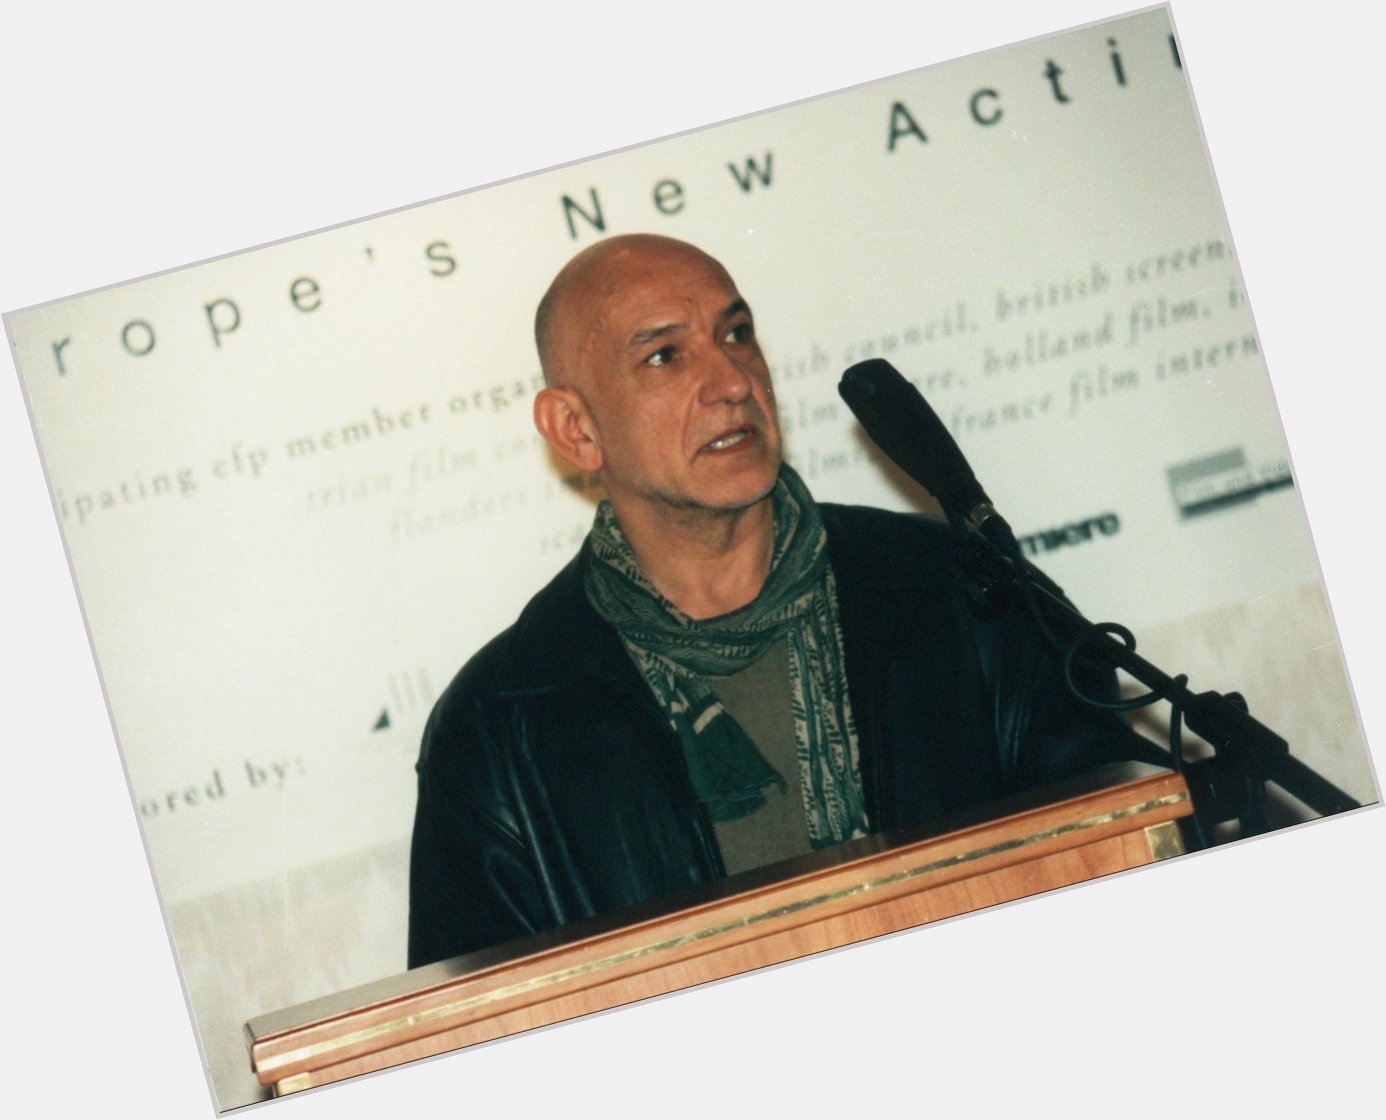  Sir Ben Kingsley once hosted the ceremony! He turns 71 today. Happy Birthday! BERLIN 1989 